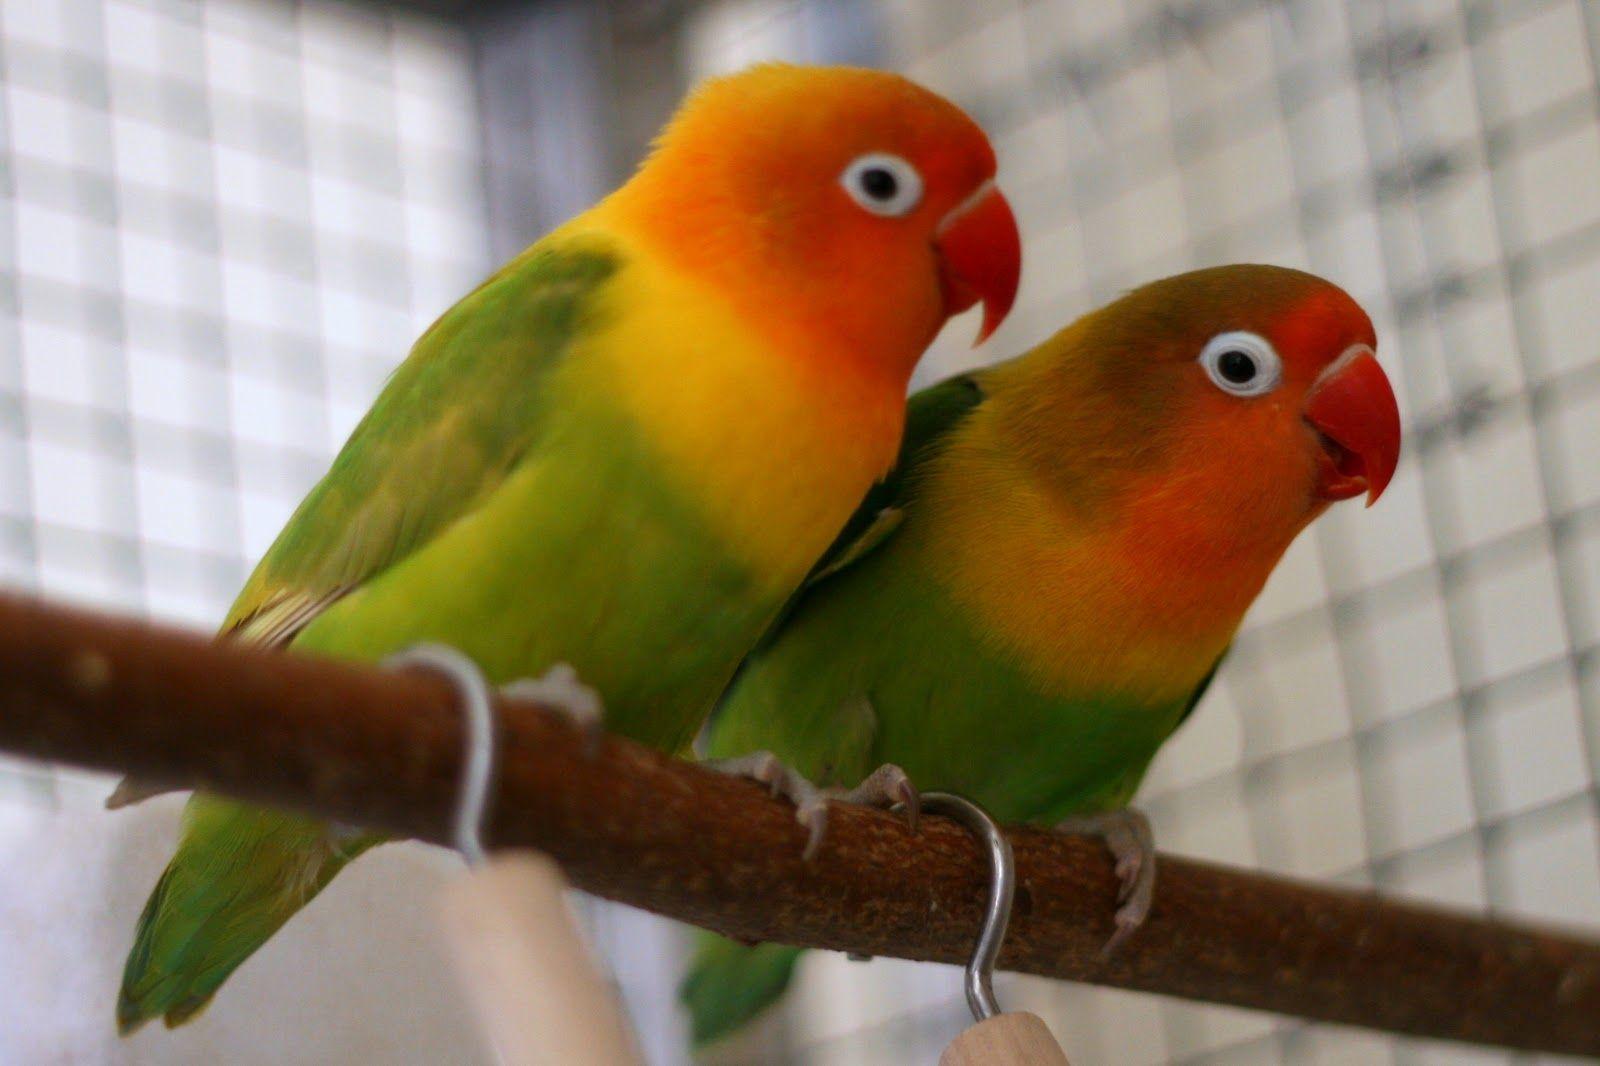 image For > Love Birds Image HD